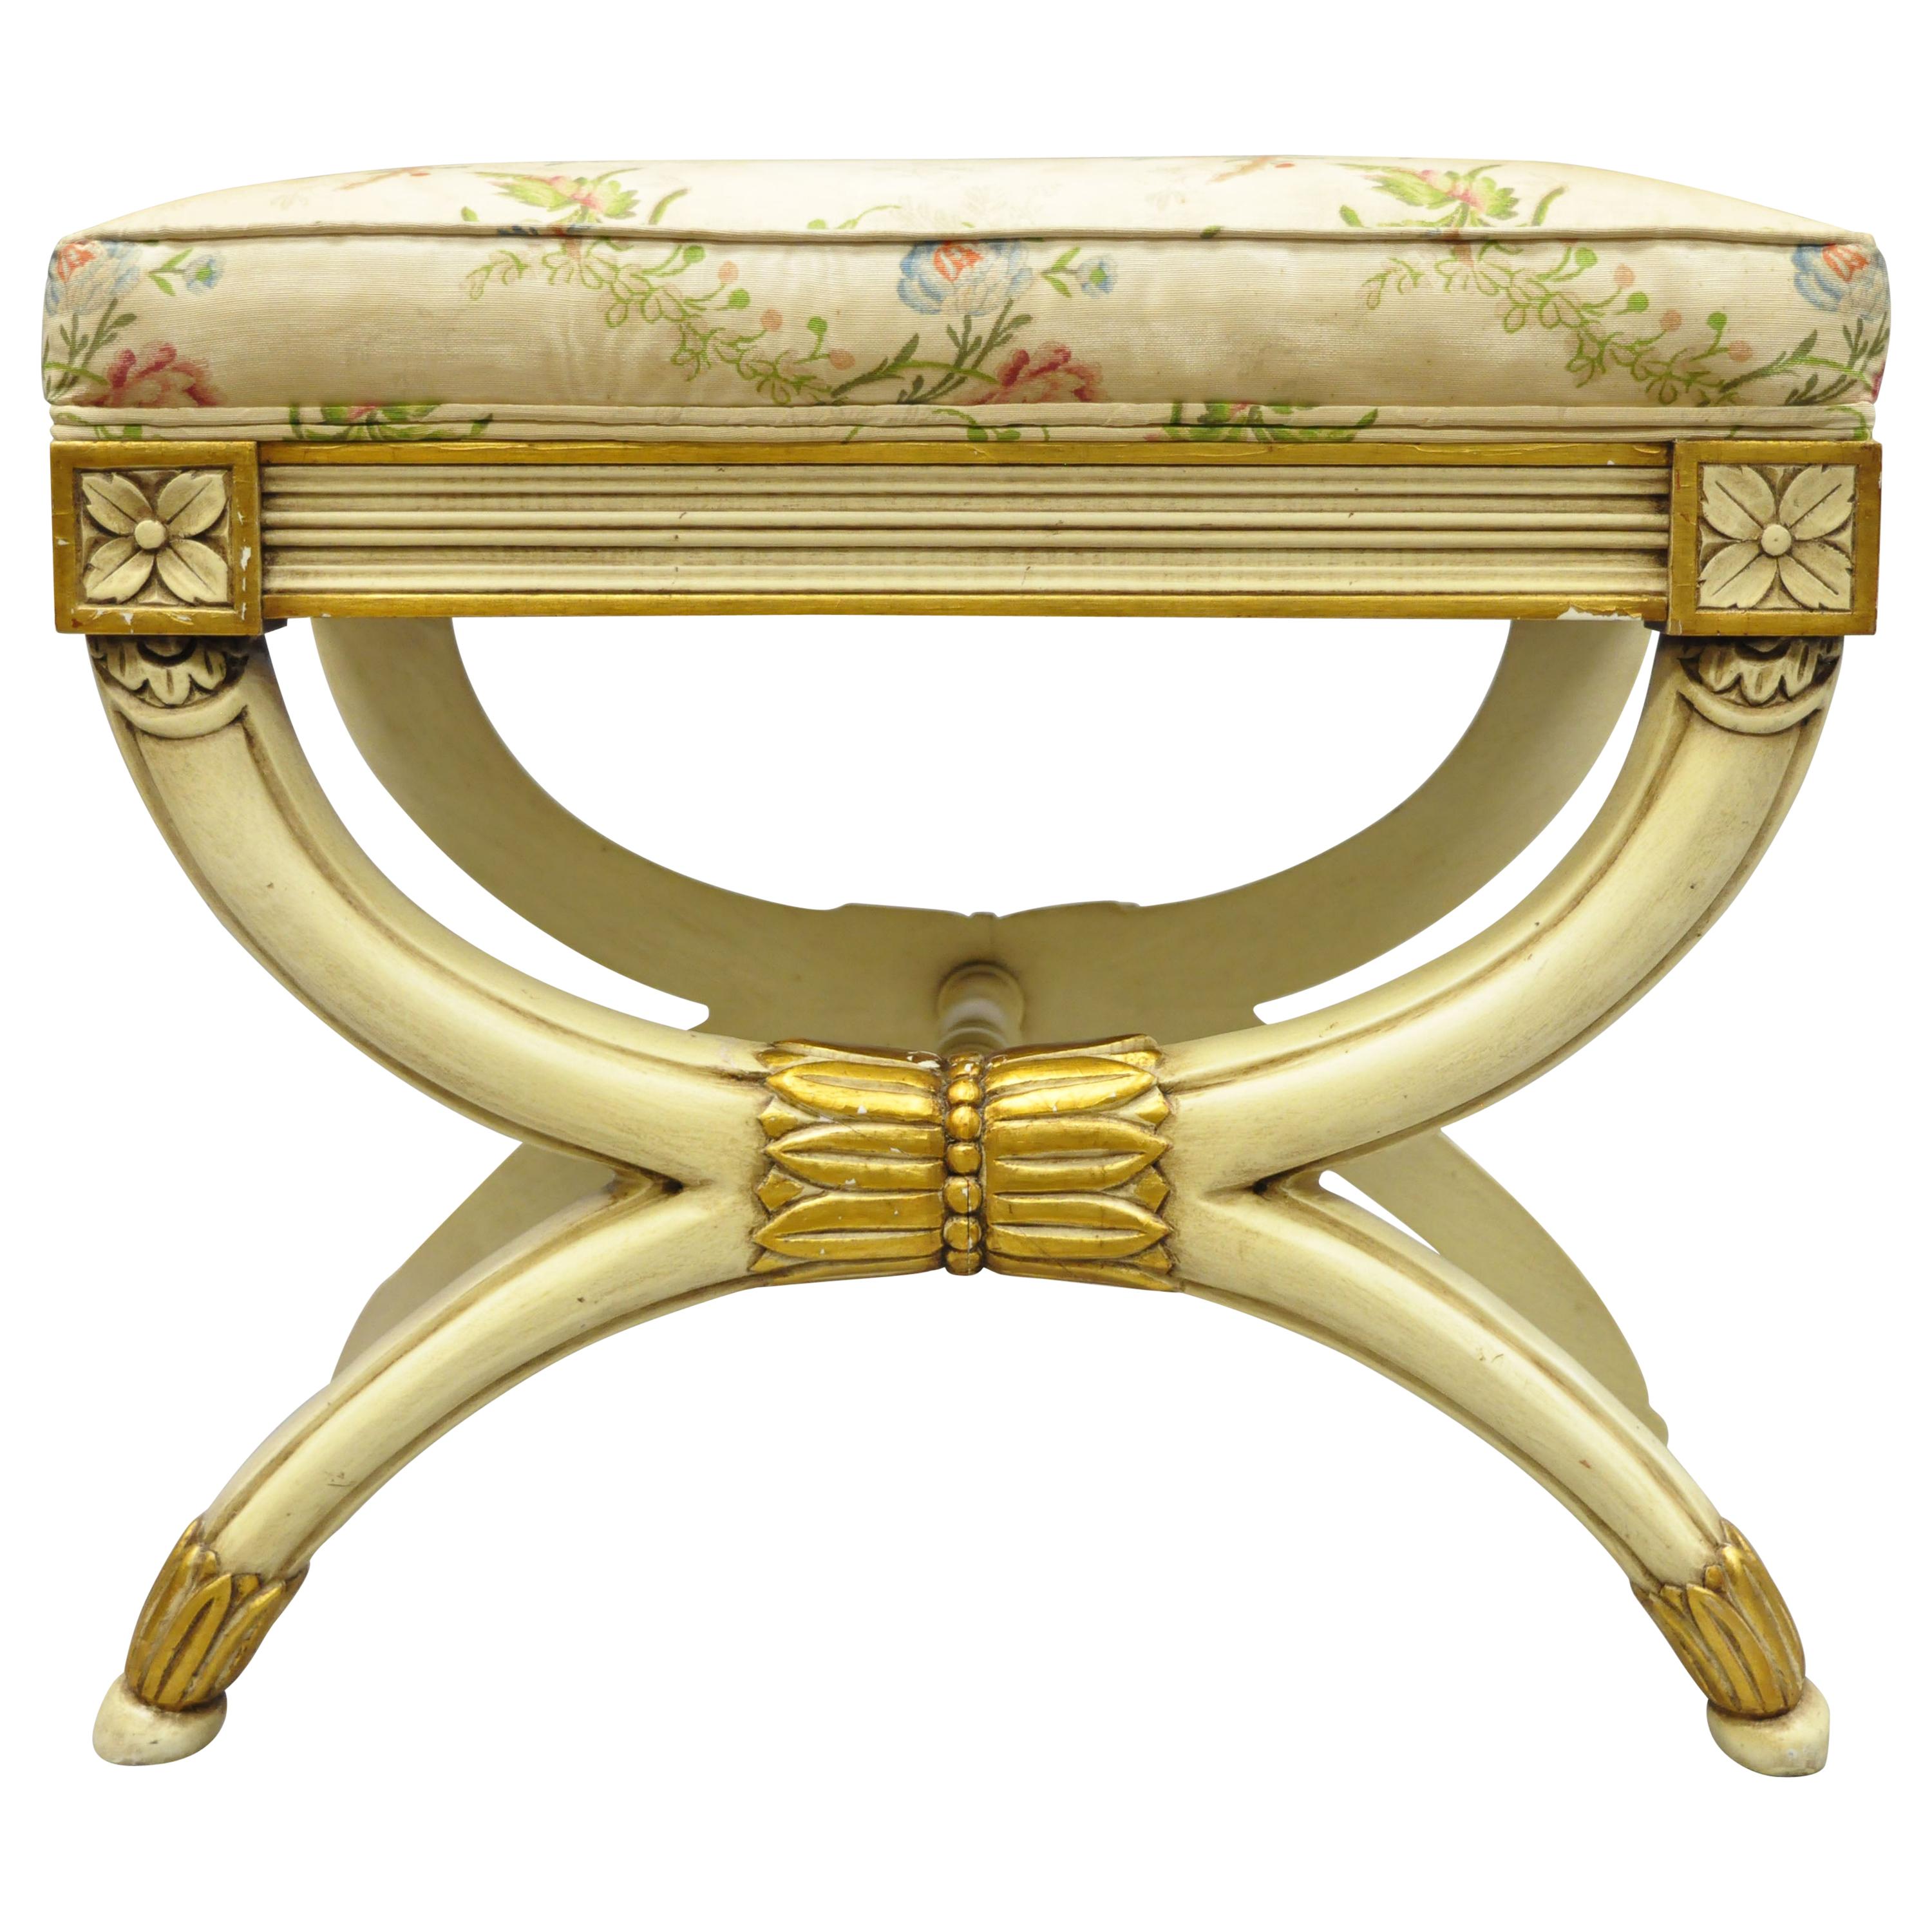 Karges X Frame French Neoclassical Regency Style Cream Gold Curule Bench Stool